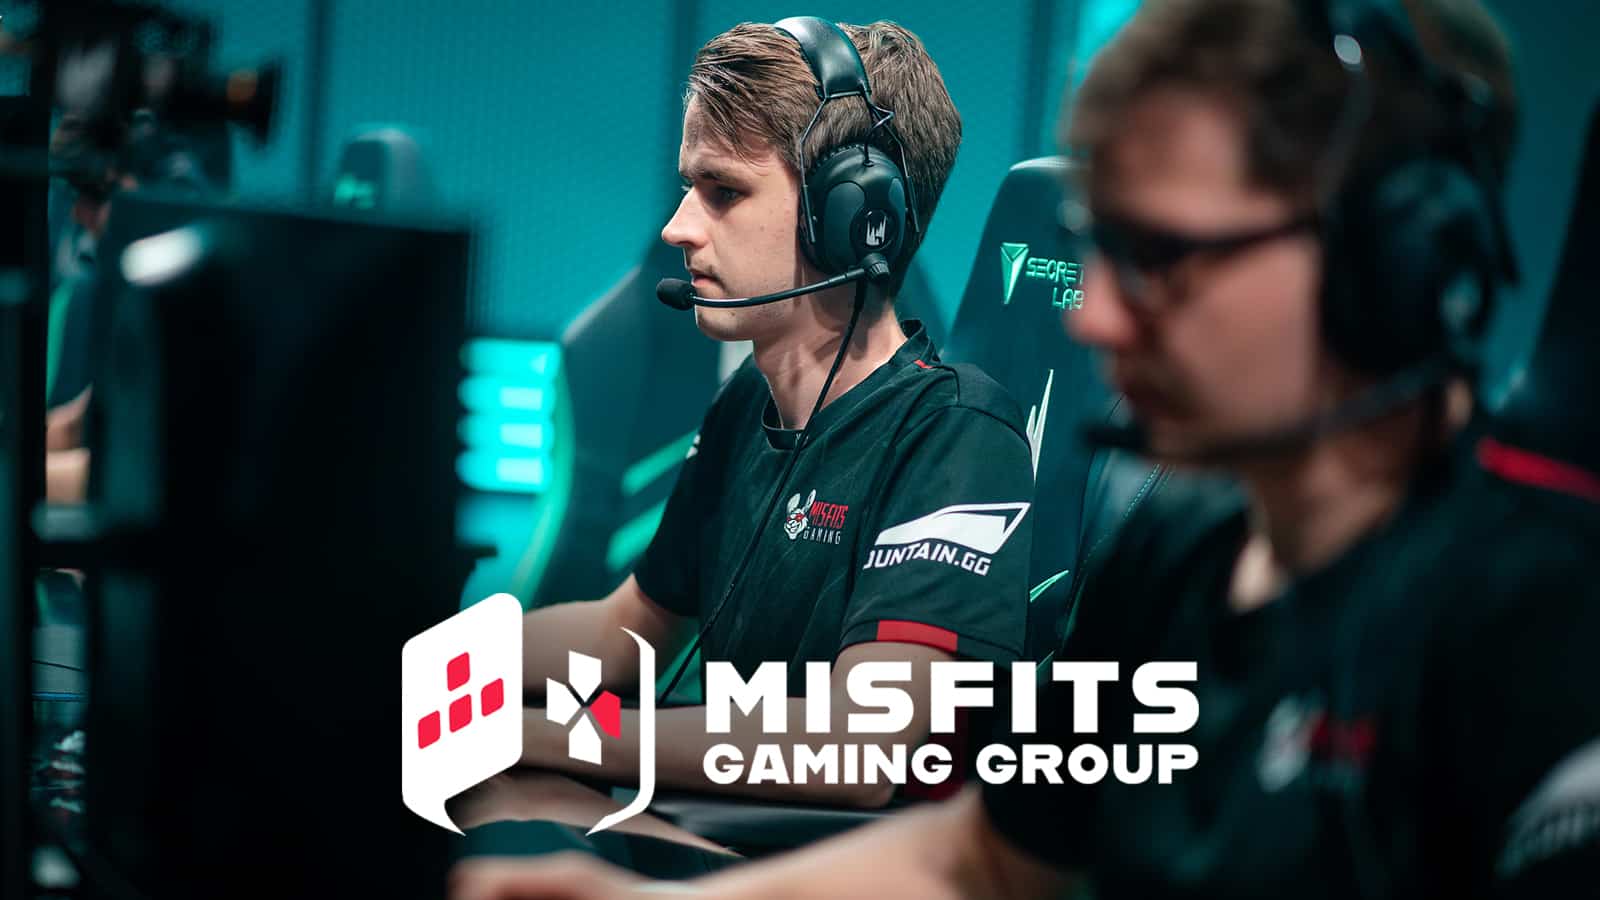 Misfits Gaming Group Signs 'Minecraft' Content Creators Ranboo